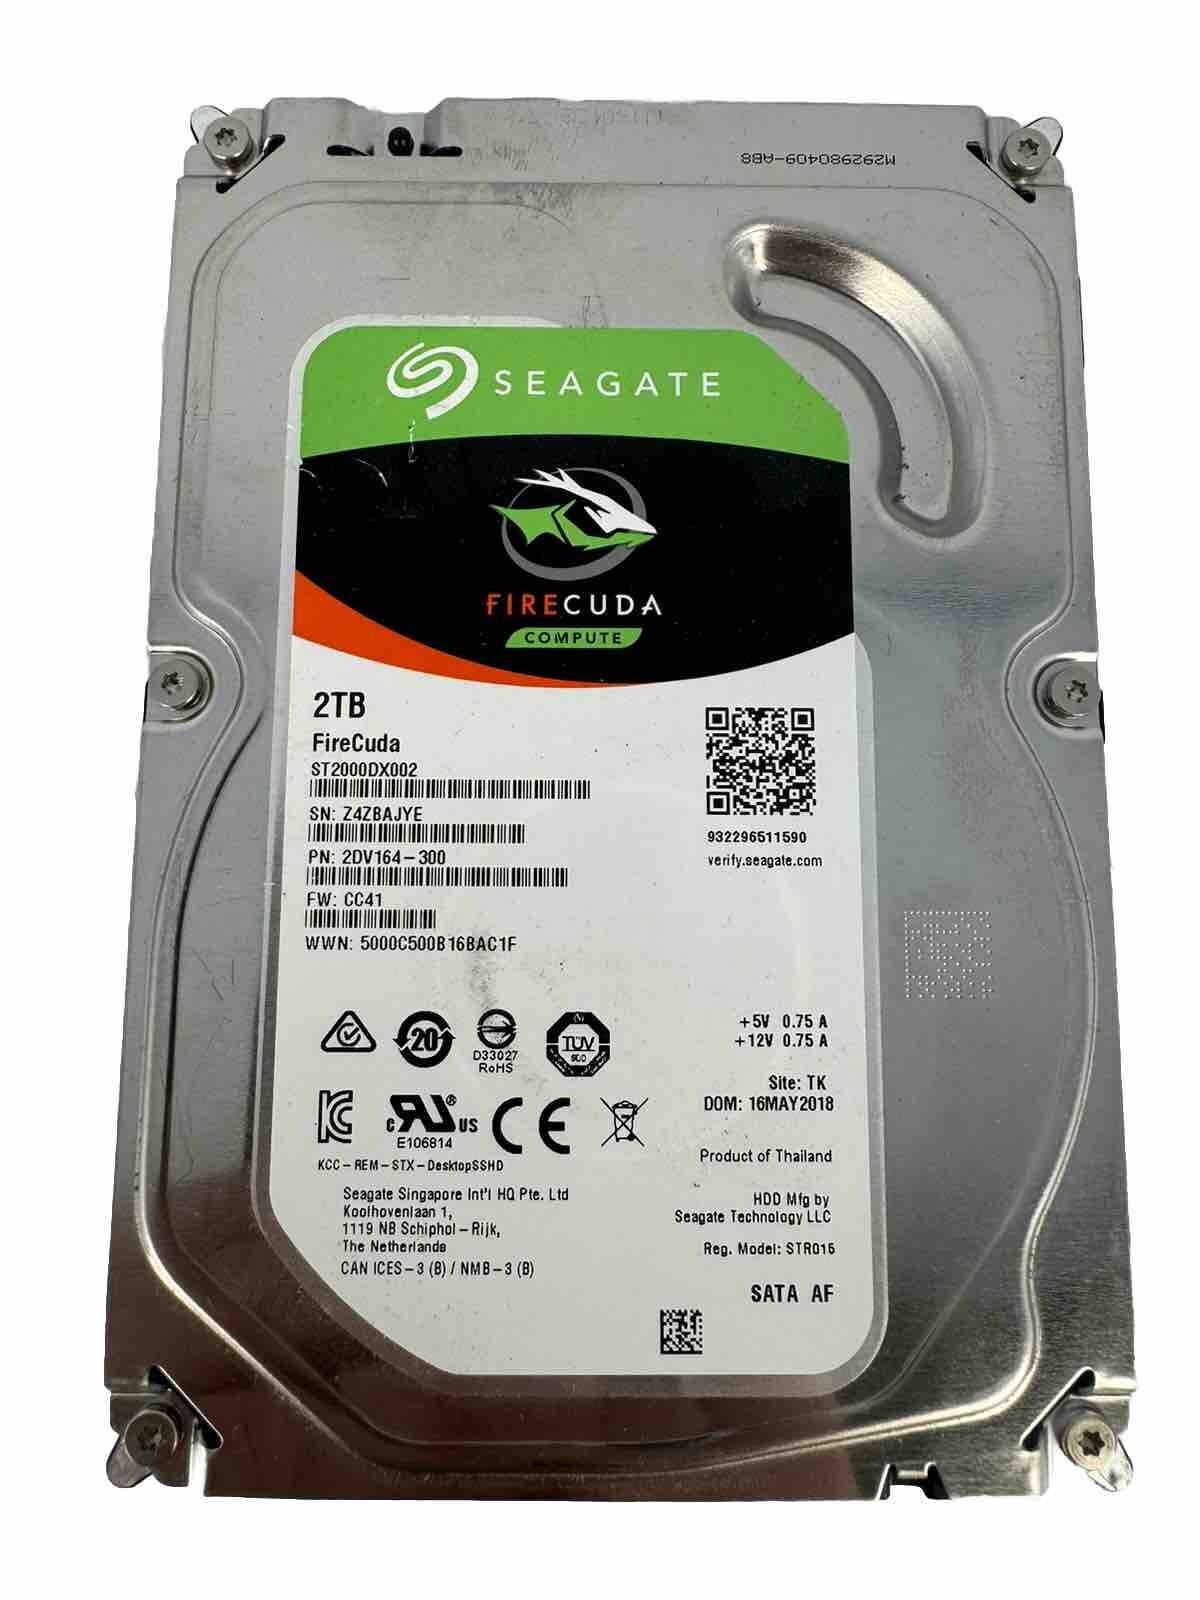 Seagate FireCuda 2TB ST2000DX002 7200 RPM Tested And Wiped